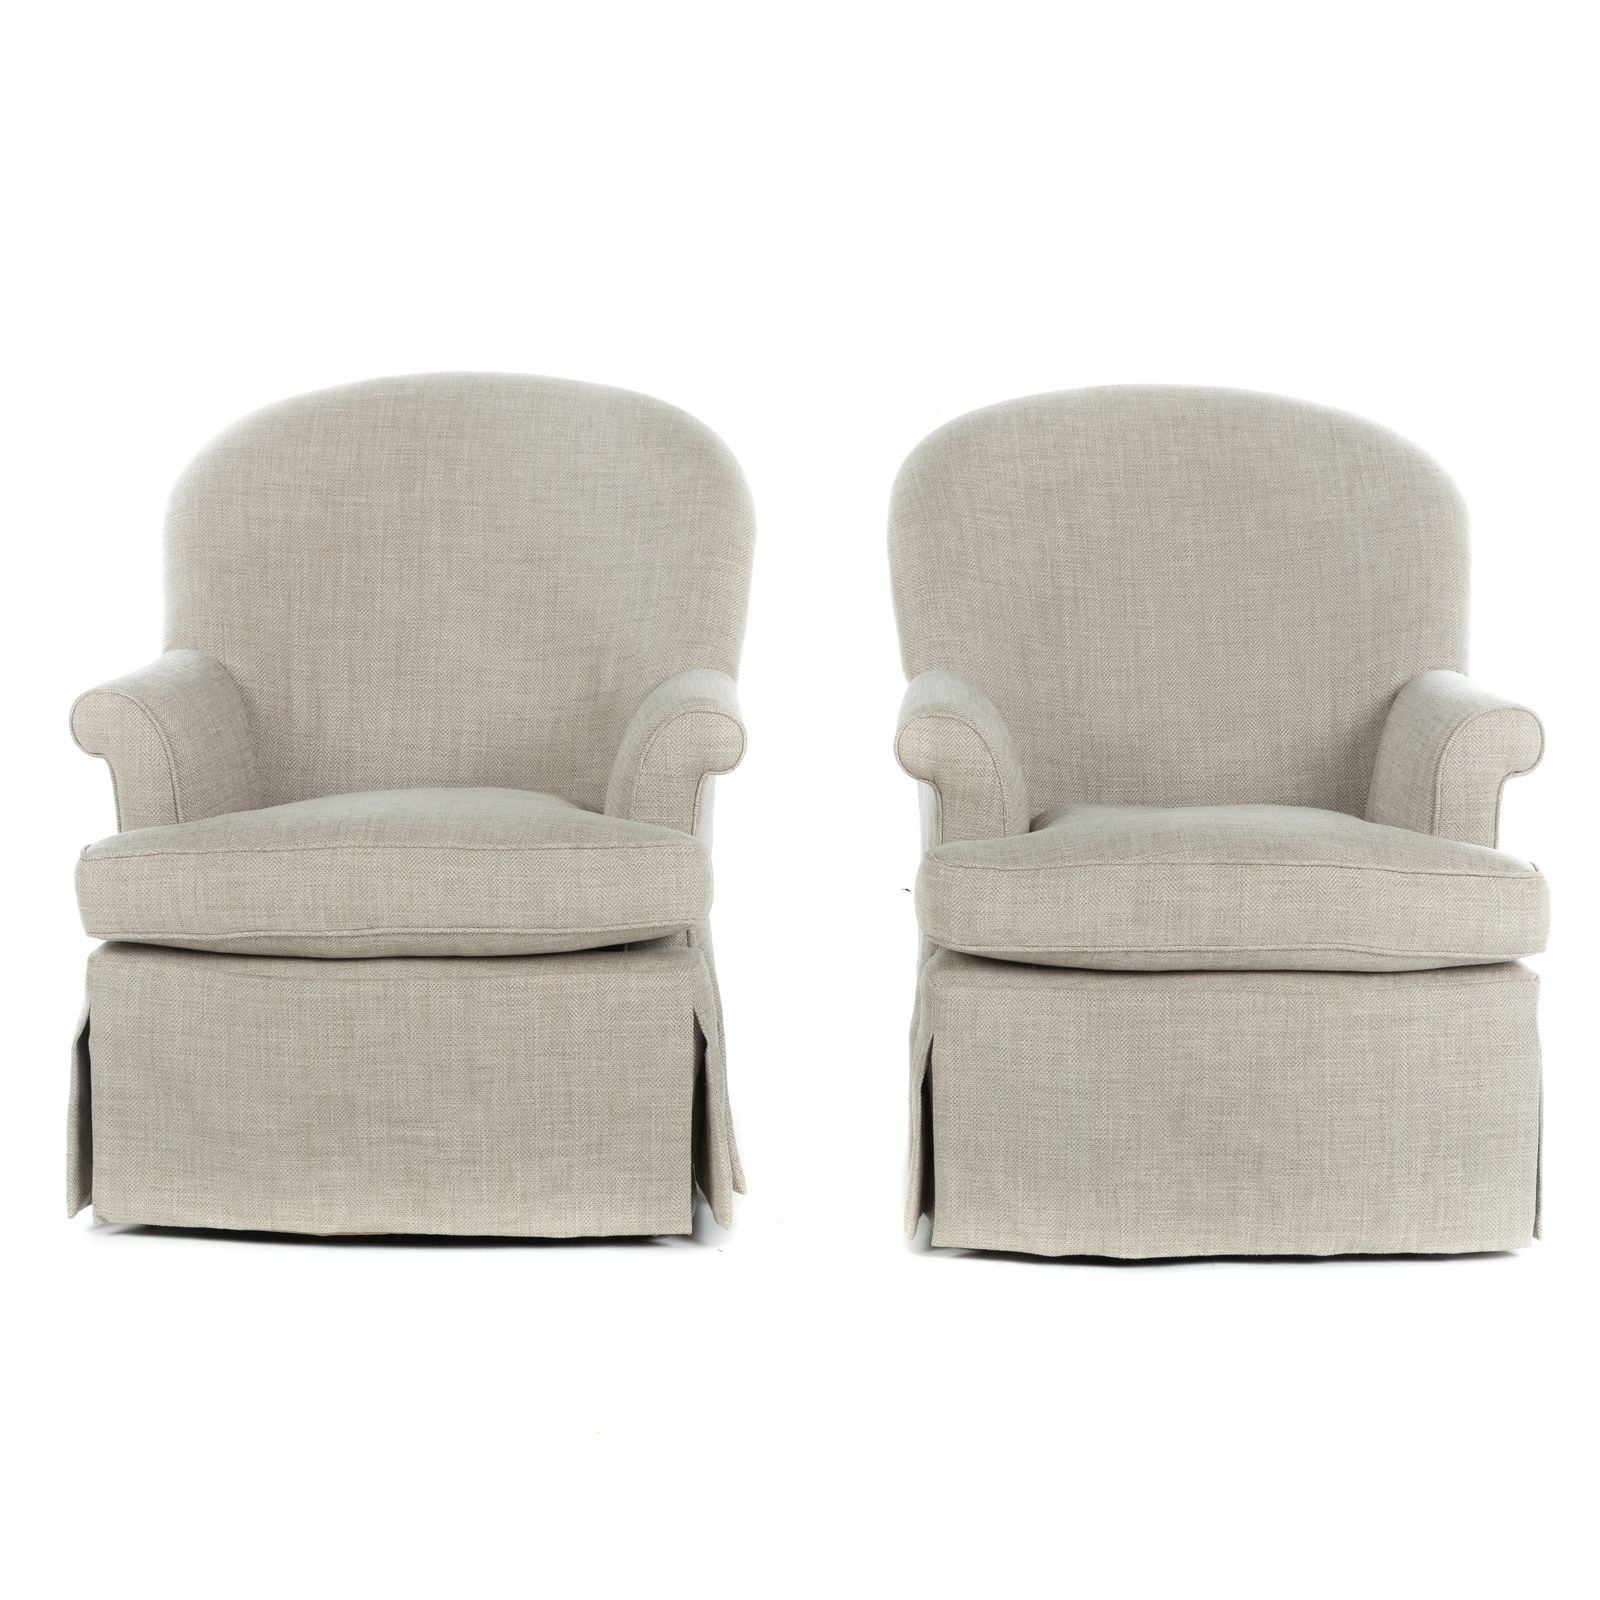 A PAIR OF CONTEMPORARY UPHOLSTERED